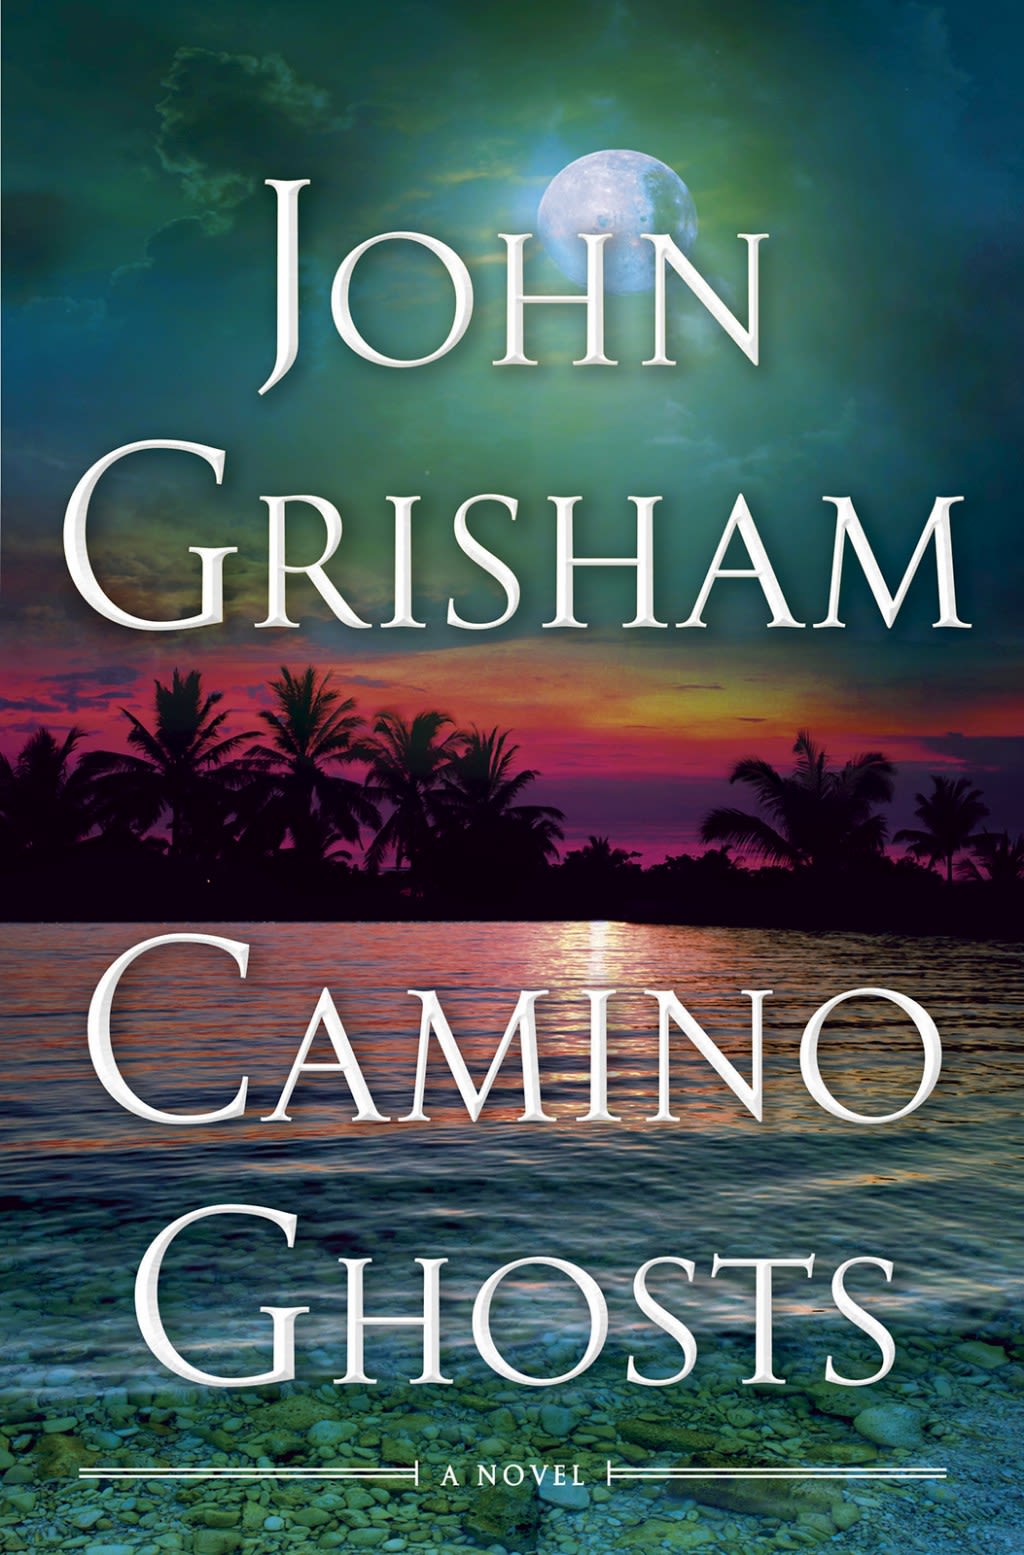 Grisham's latest has lawyers searching for 'Camino Ghosts'